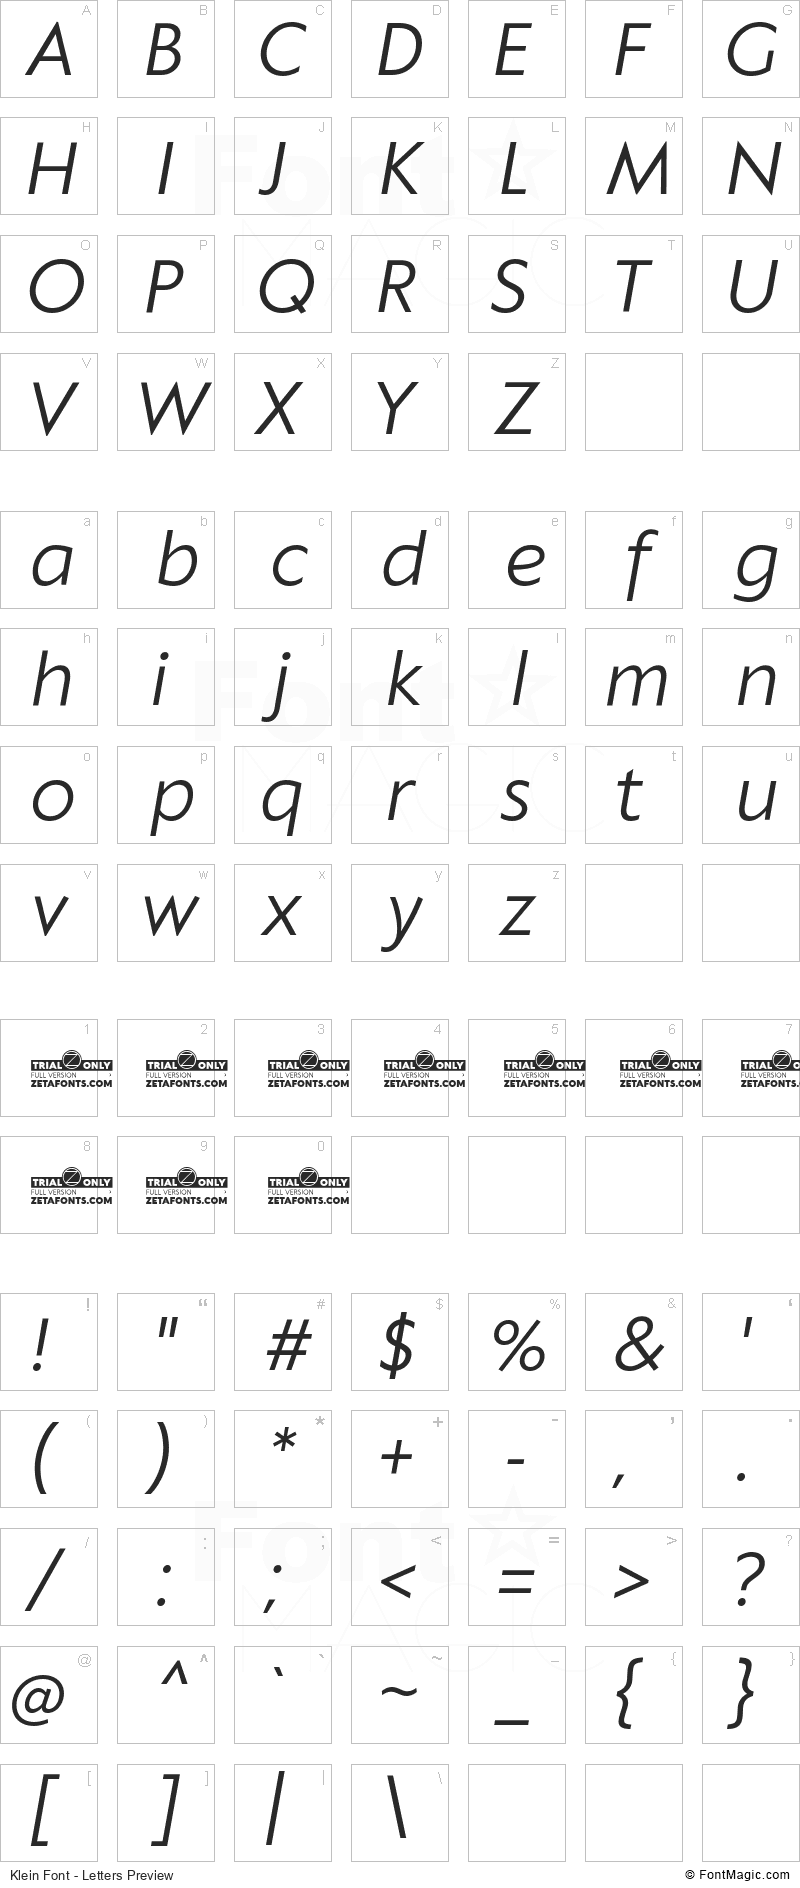 Klein Font - All Latters Preview Chart